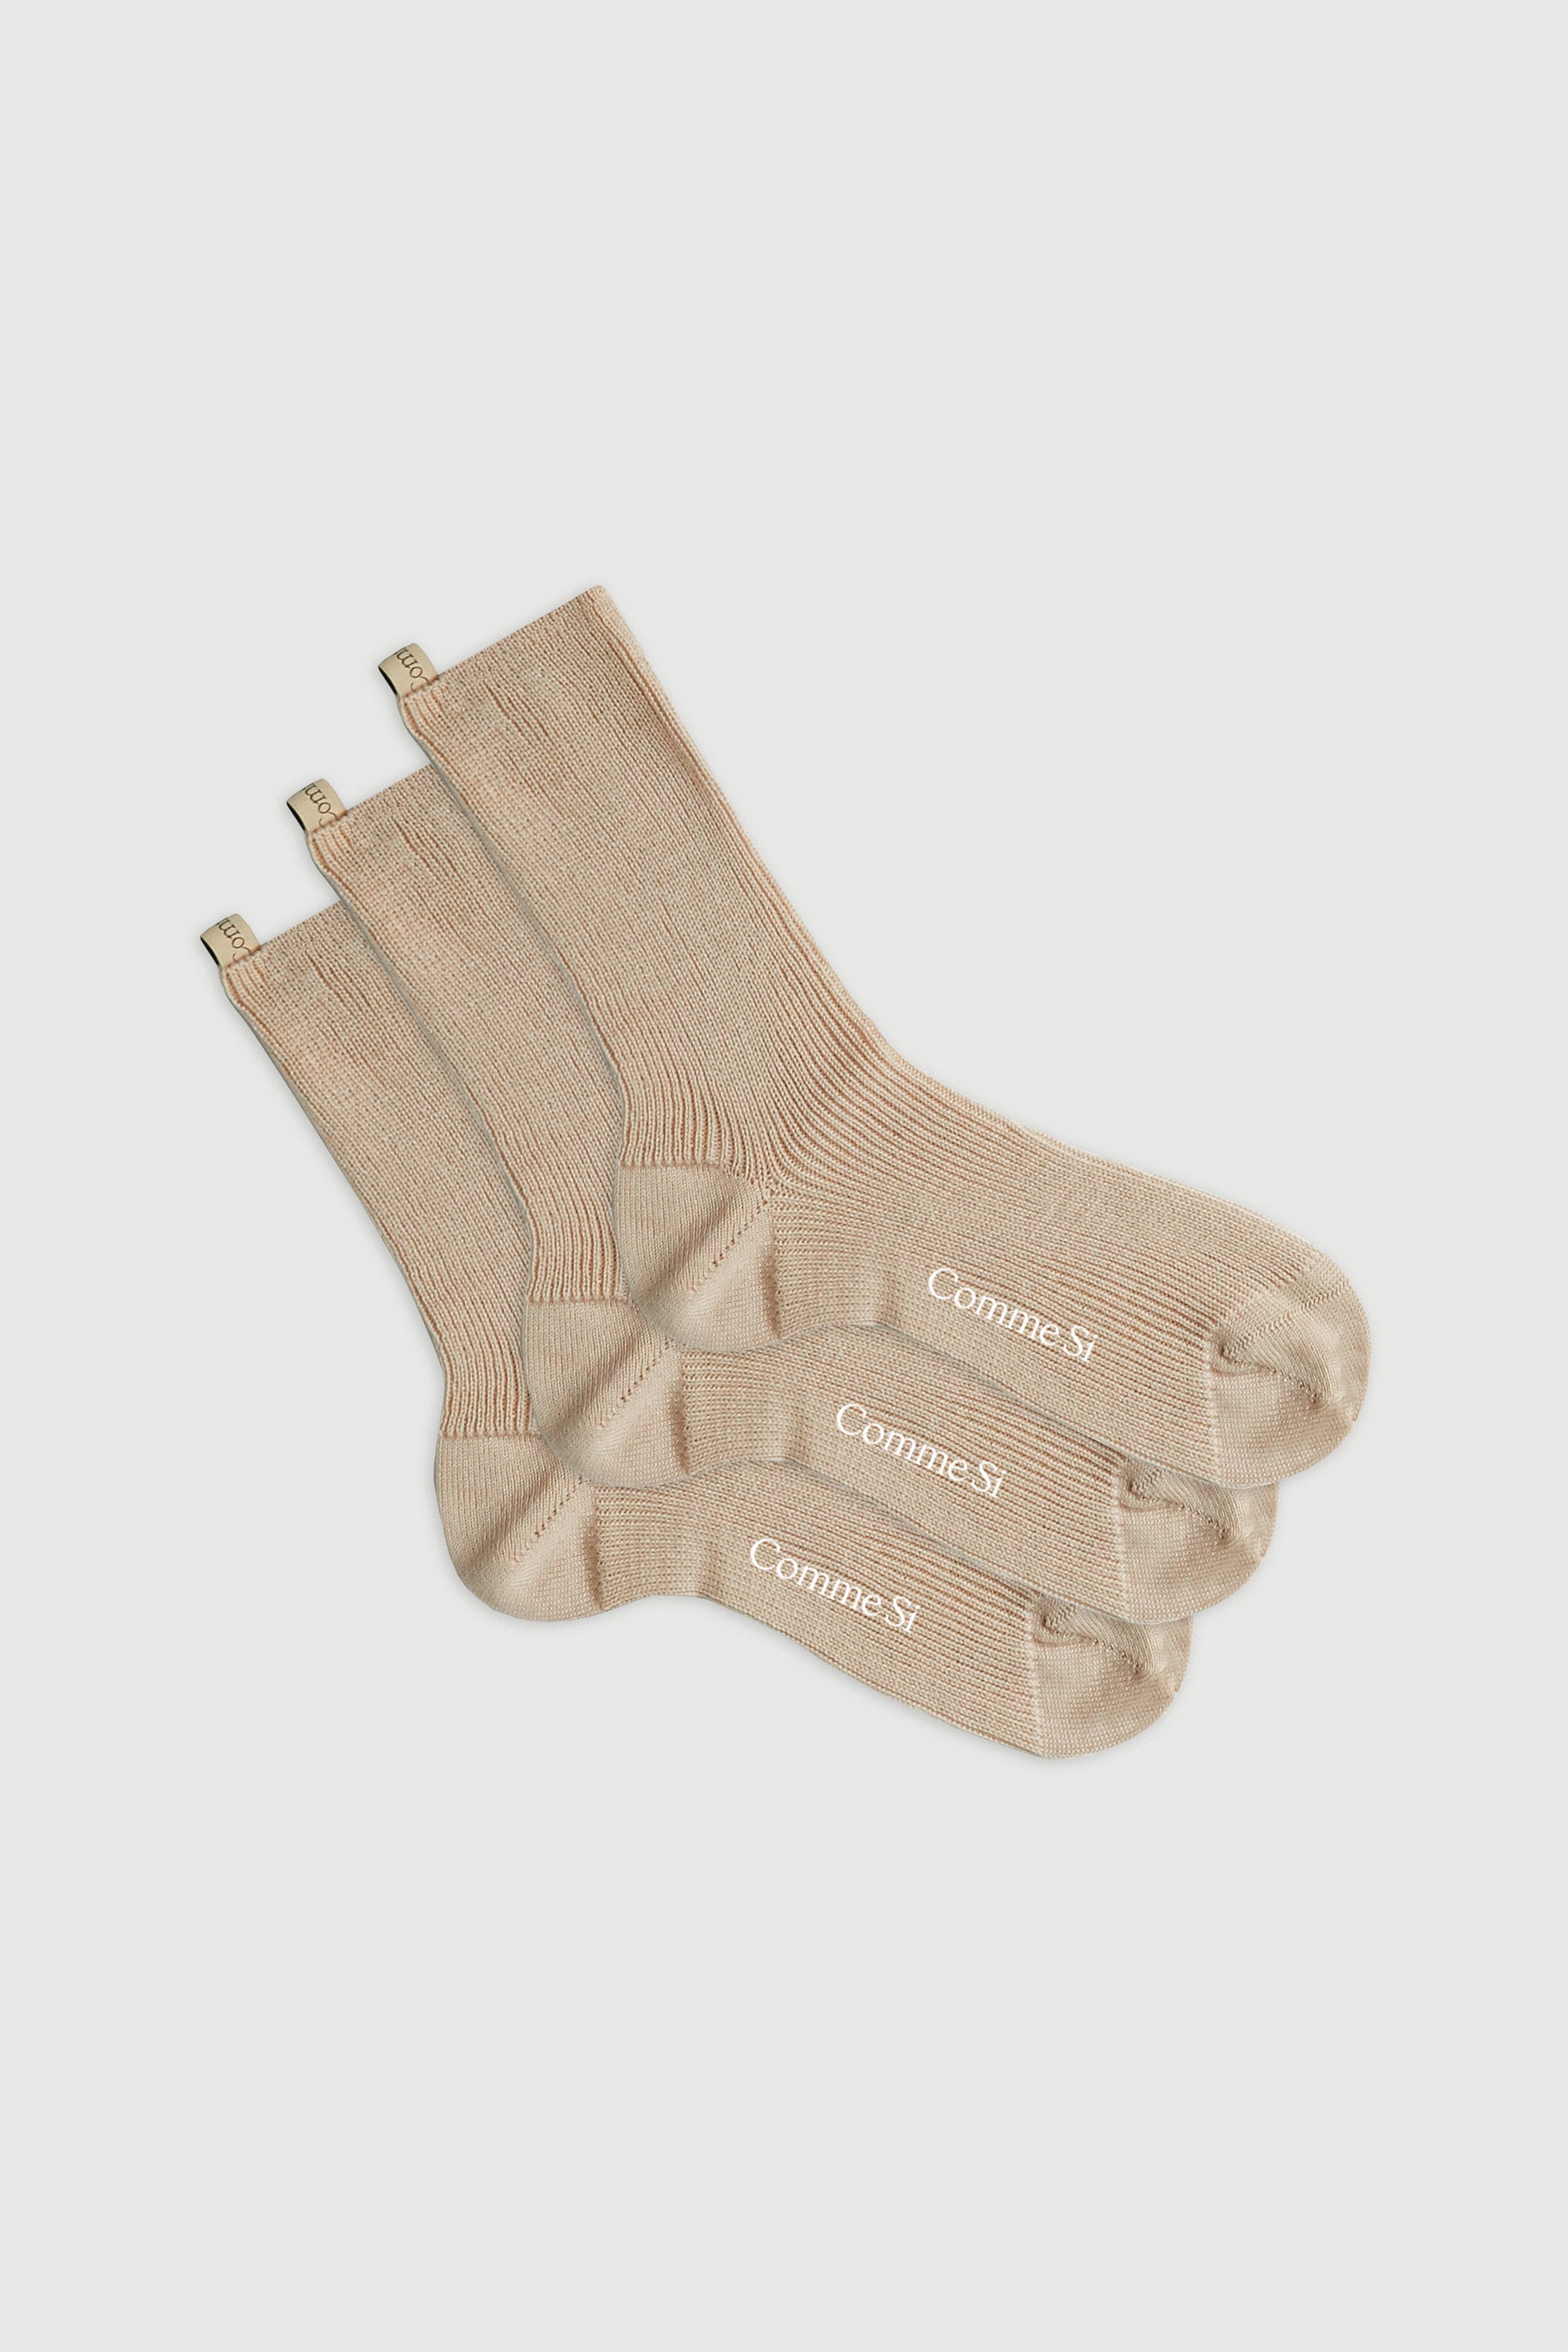 The merino trio in bisque, set of three merino wool socks, by Comme Si